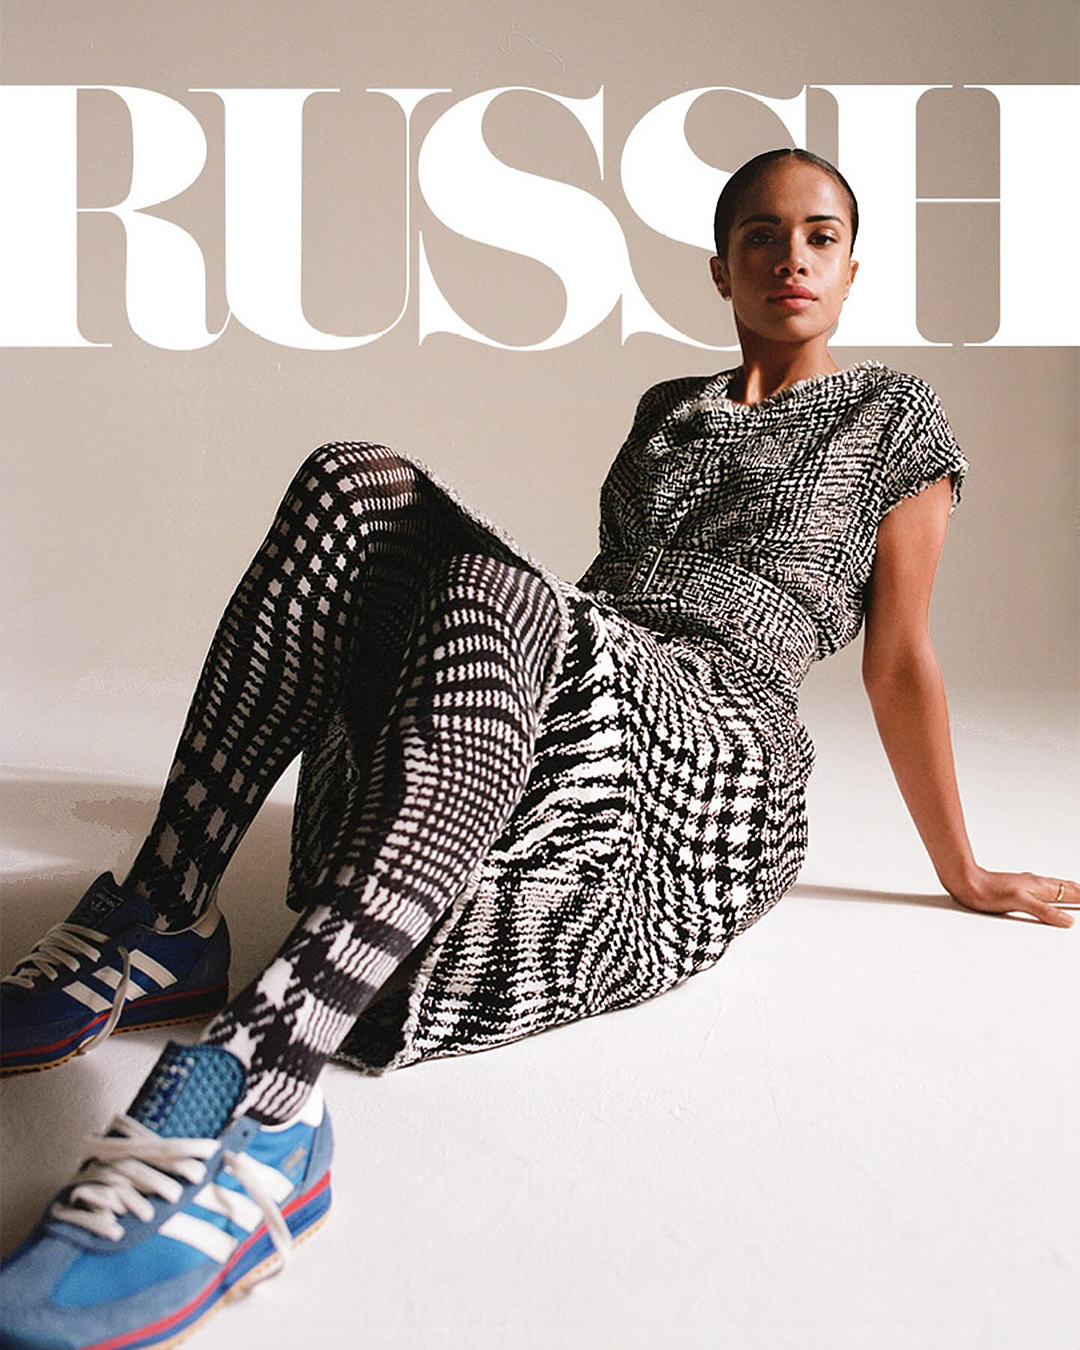 Mary Fowler on the cover of Russh Magazine